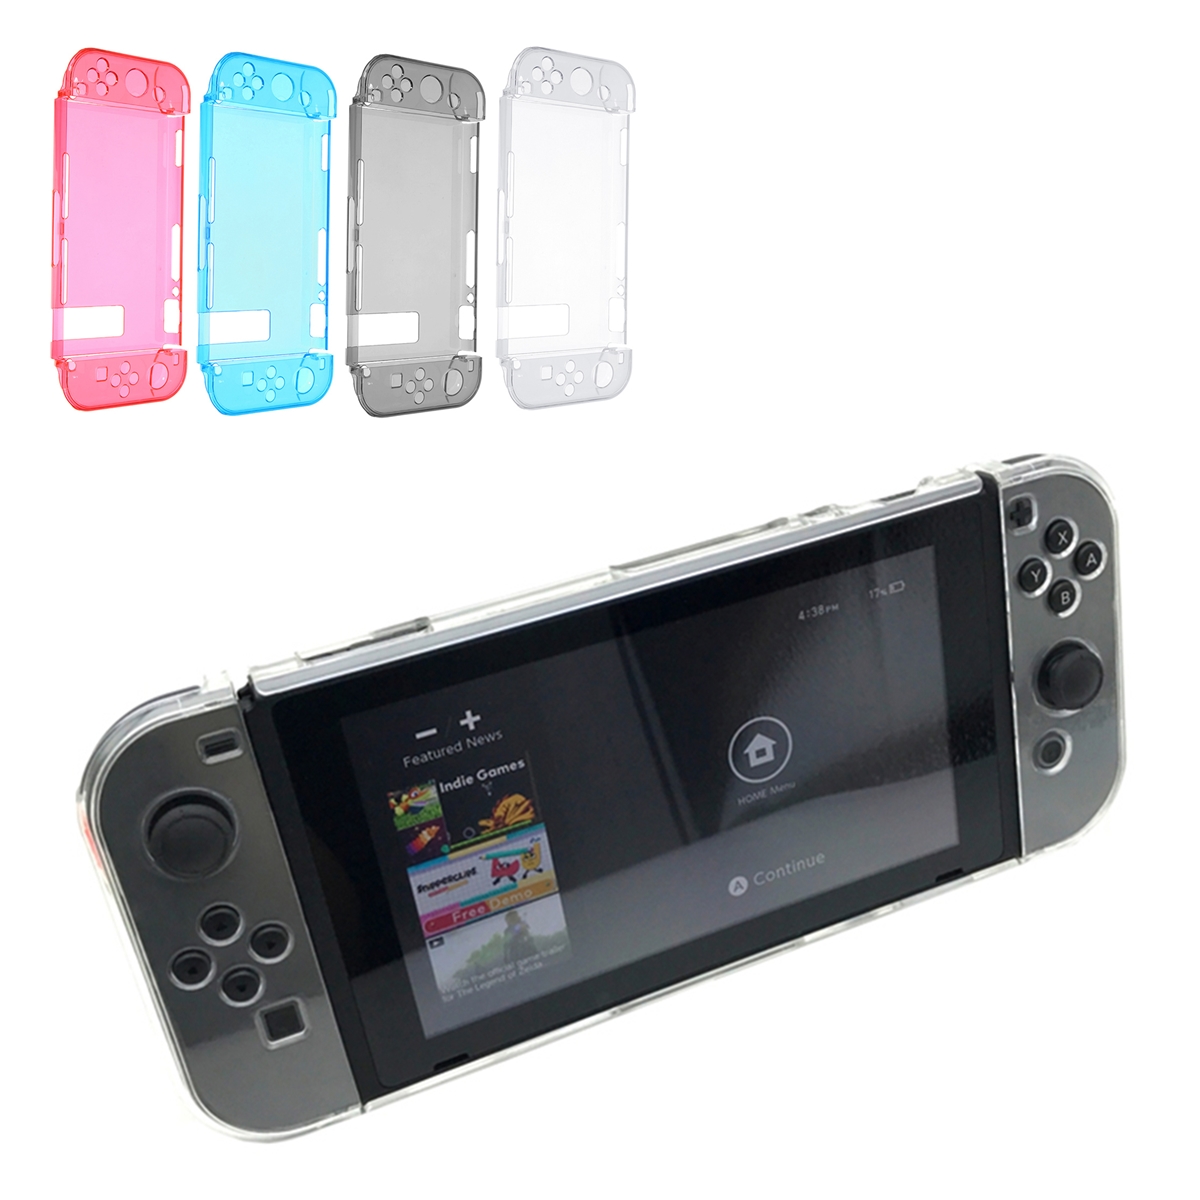 Detachable-Protective-Hard-Case-Cover-Shell-Skin-For-Nintendo-Switch-Joy-Con-Gamepad-Game-Console-1431741-2